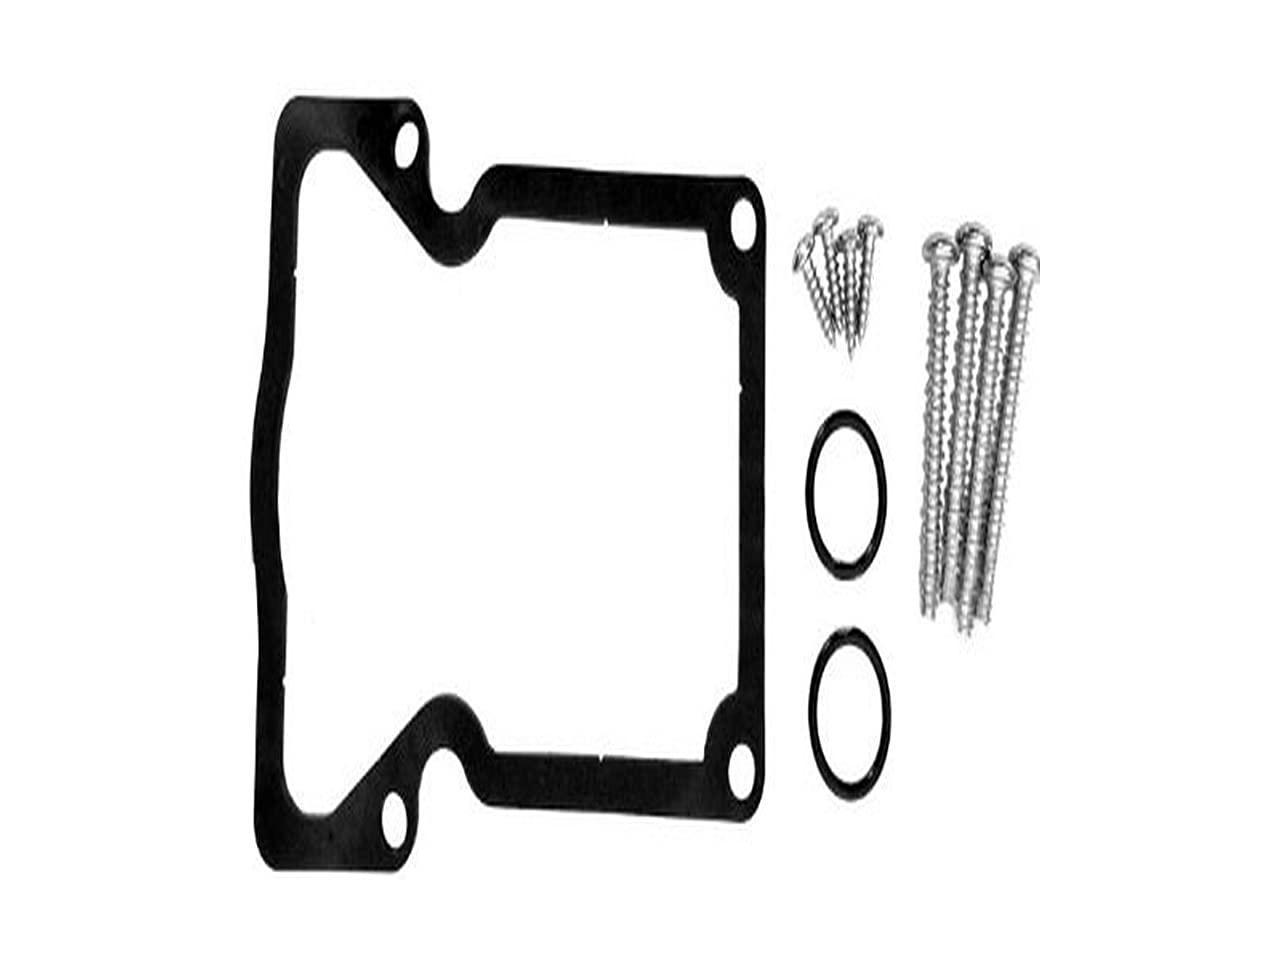 Jandy Gasket and Screw Jav Replacement Kit for 2444 Model